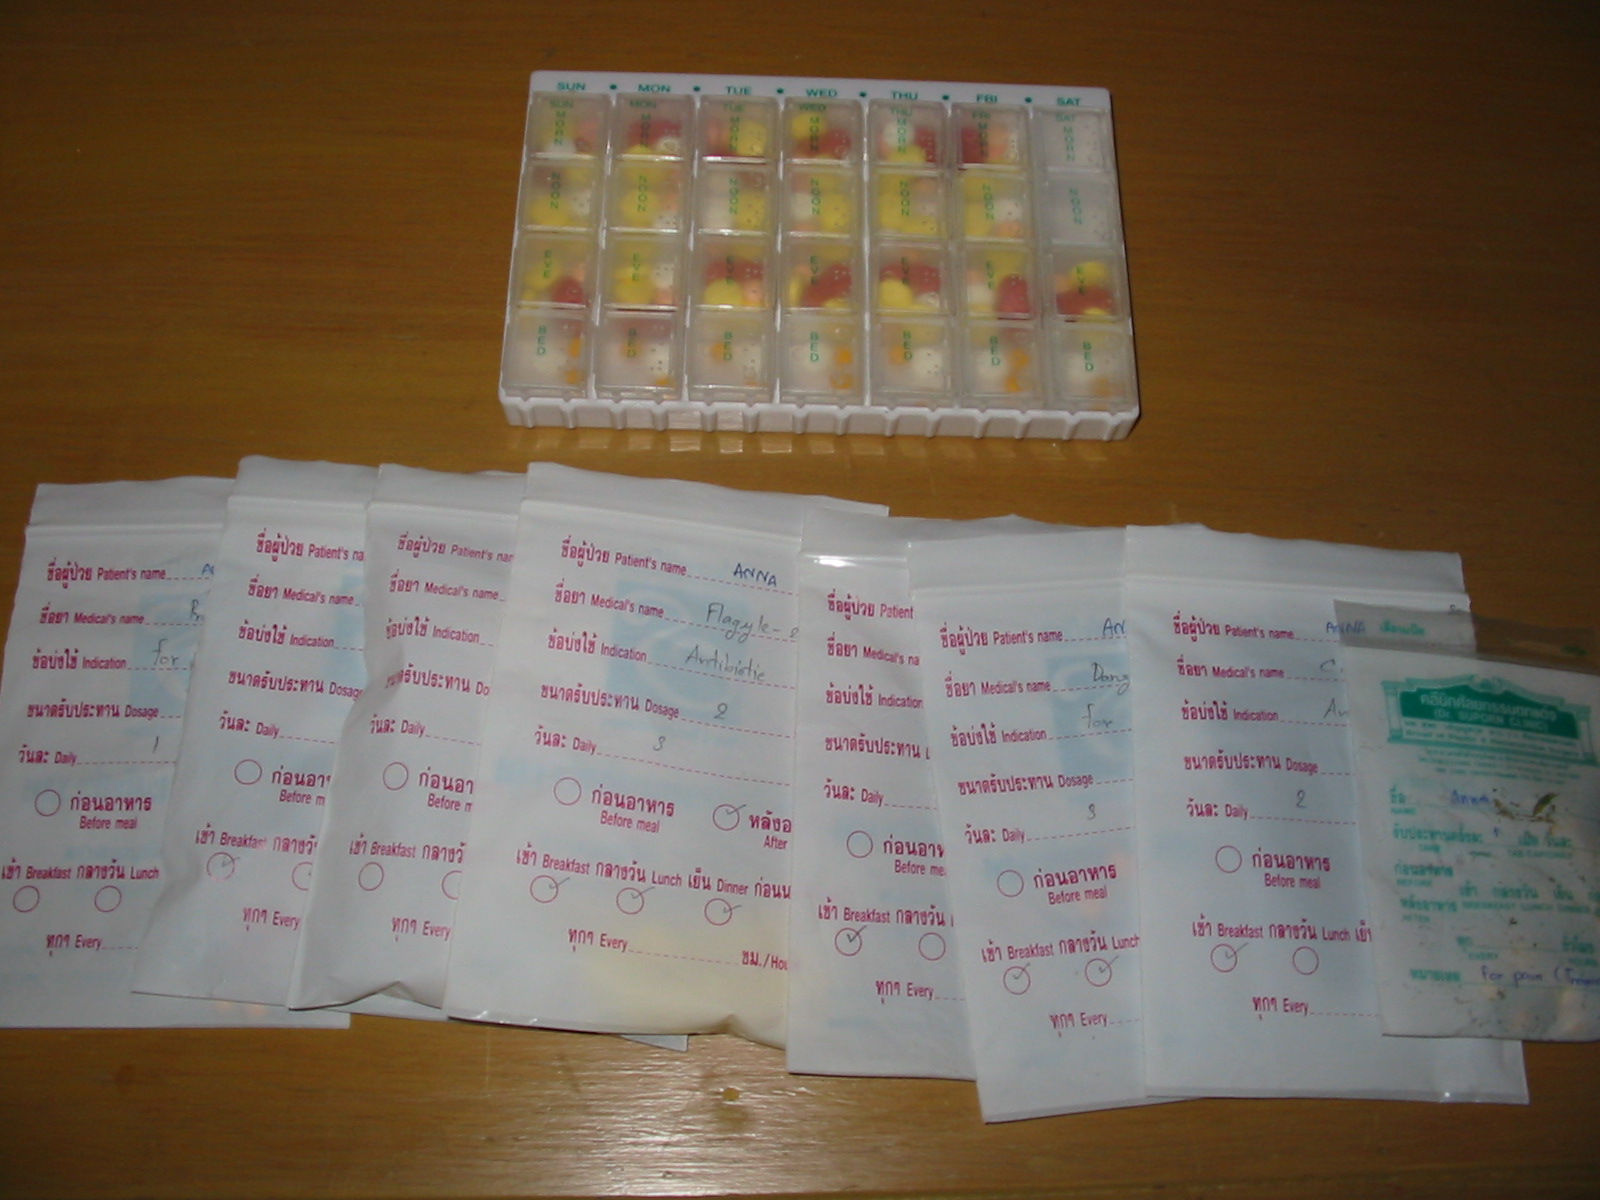 All those meds take some organising. A pill box helps